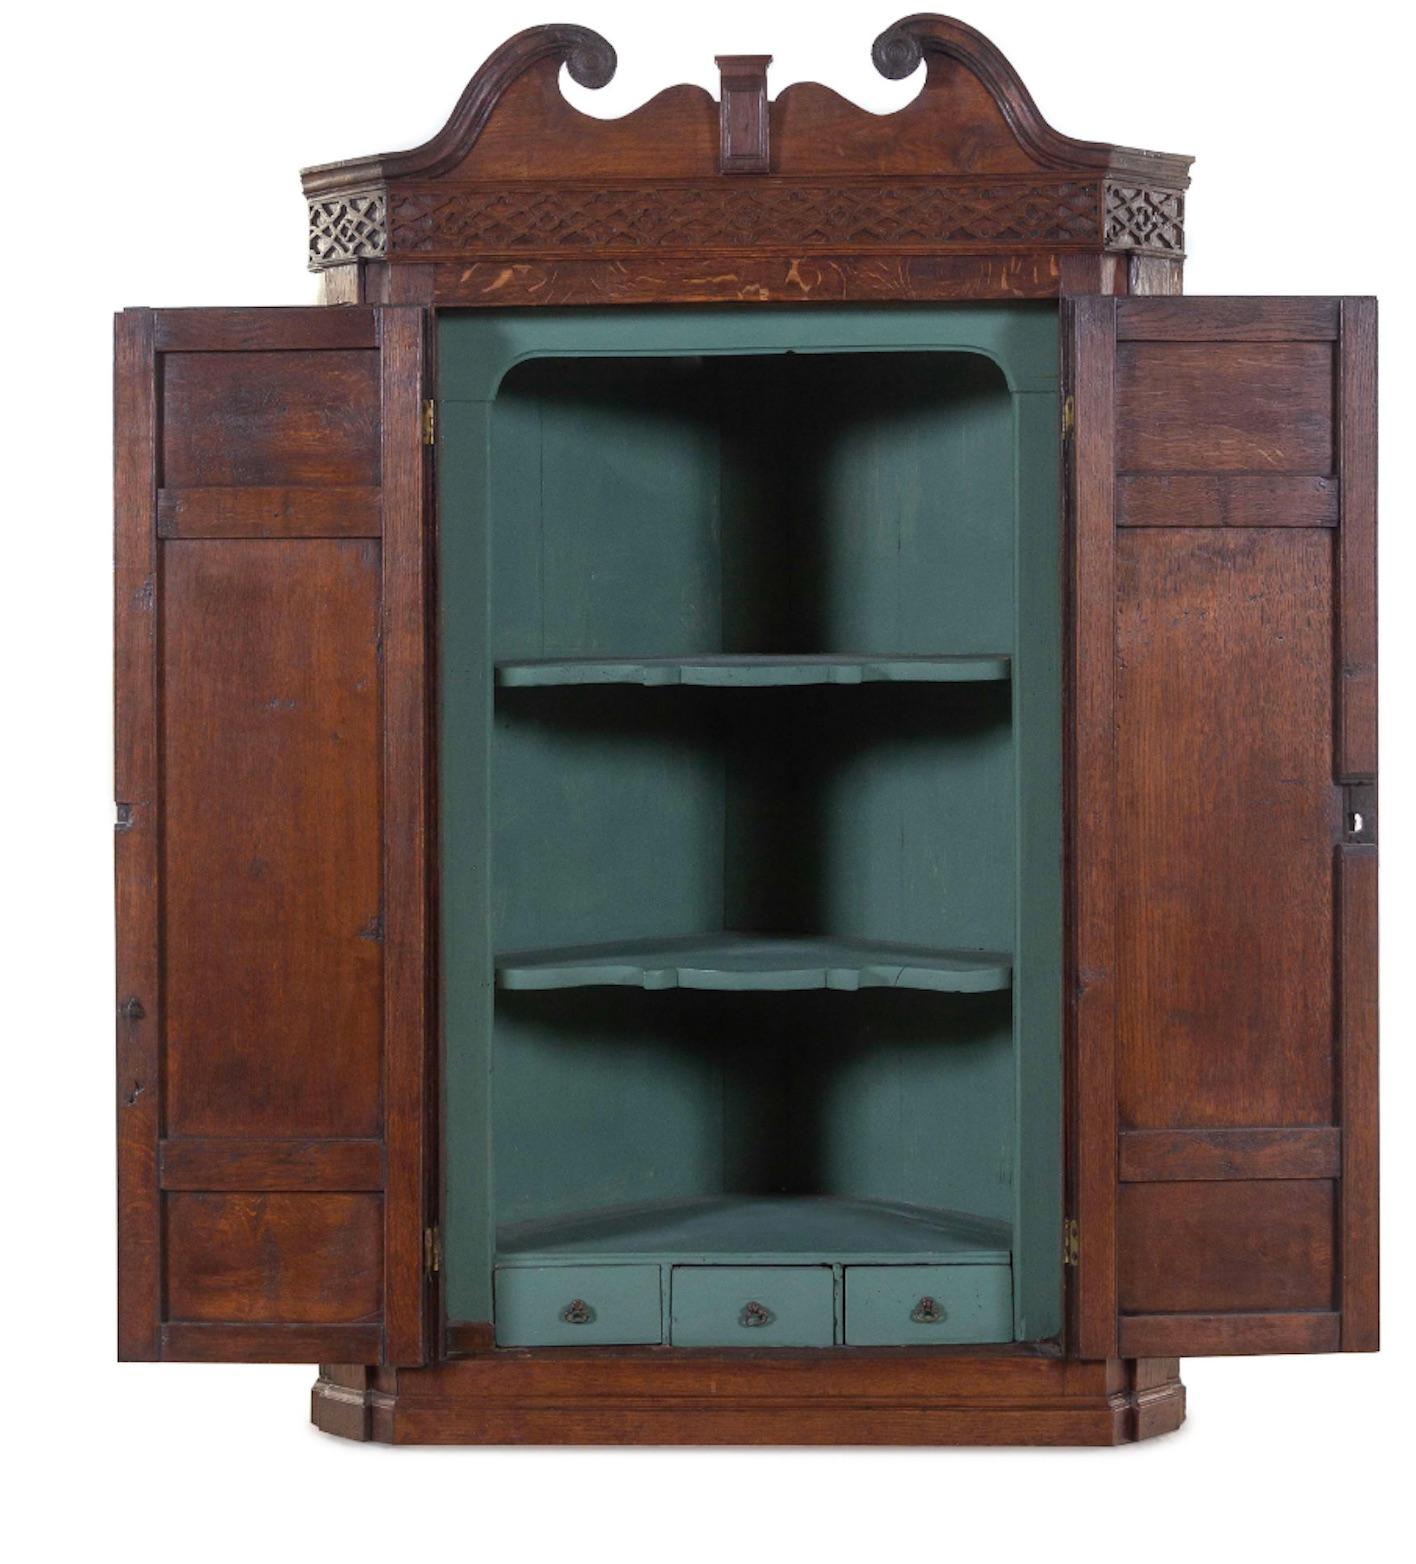 19th Century George III Oak Hanging Corner Cabinet, Great Scale, Color and Proportions For Sale